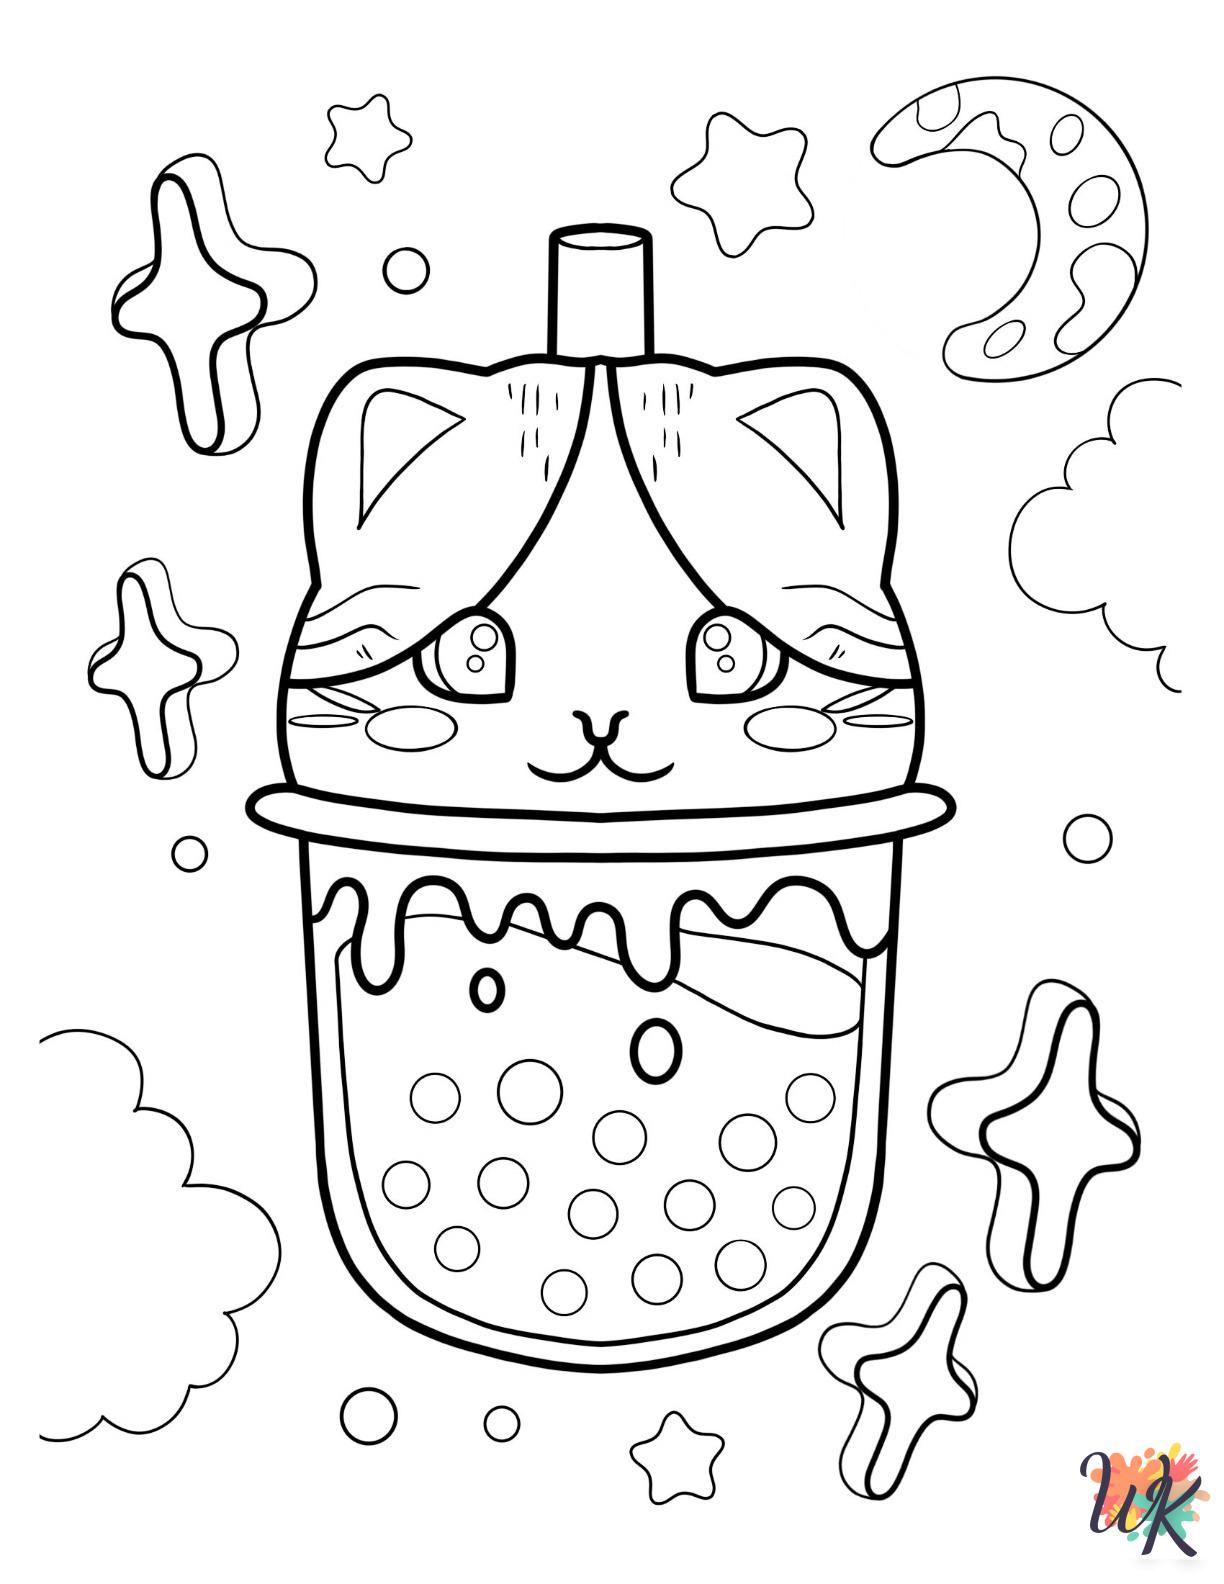 Boba Tea coloring pages for adults easy